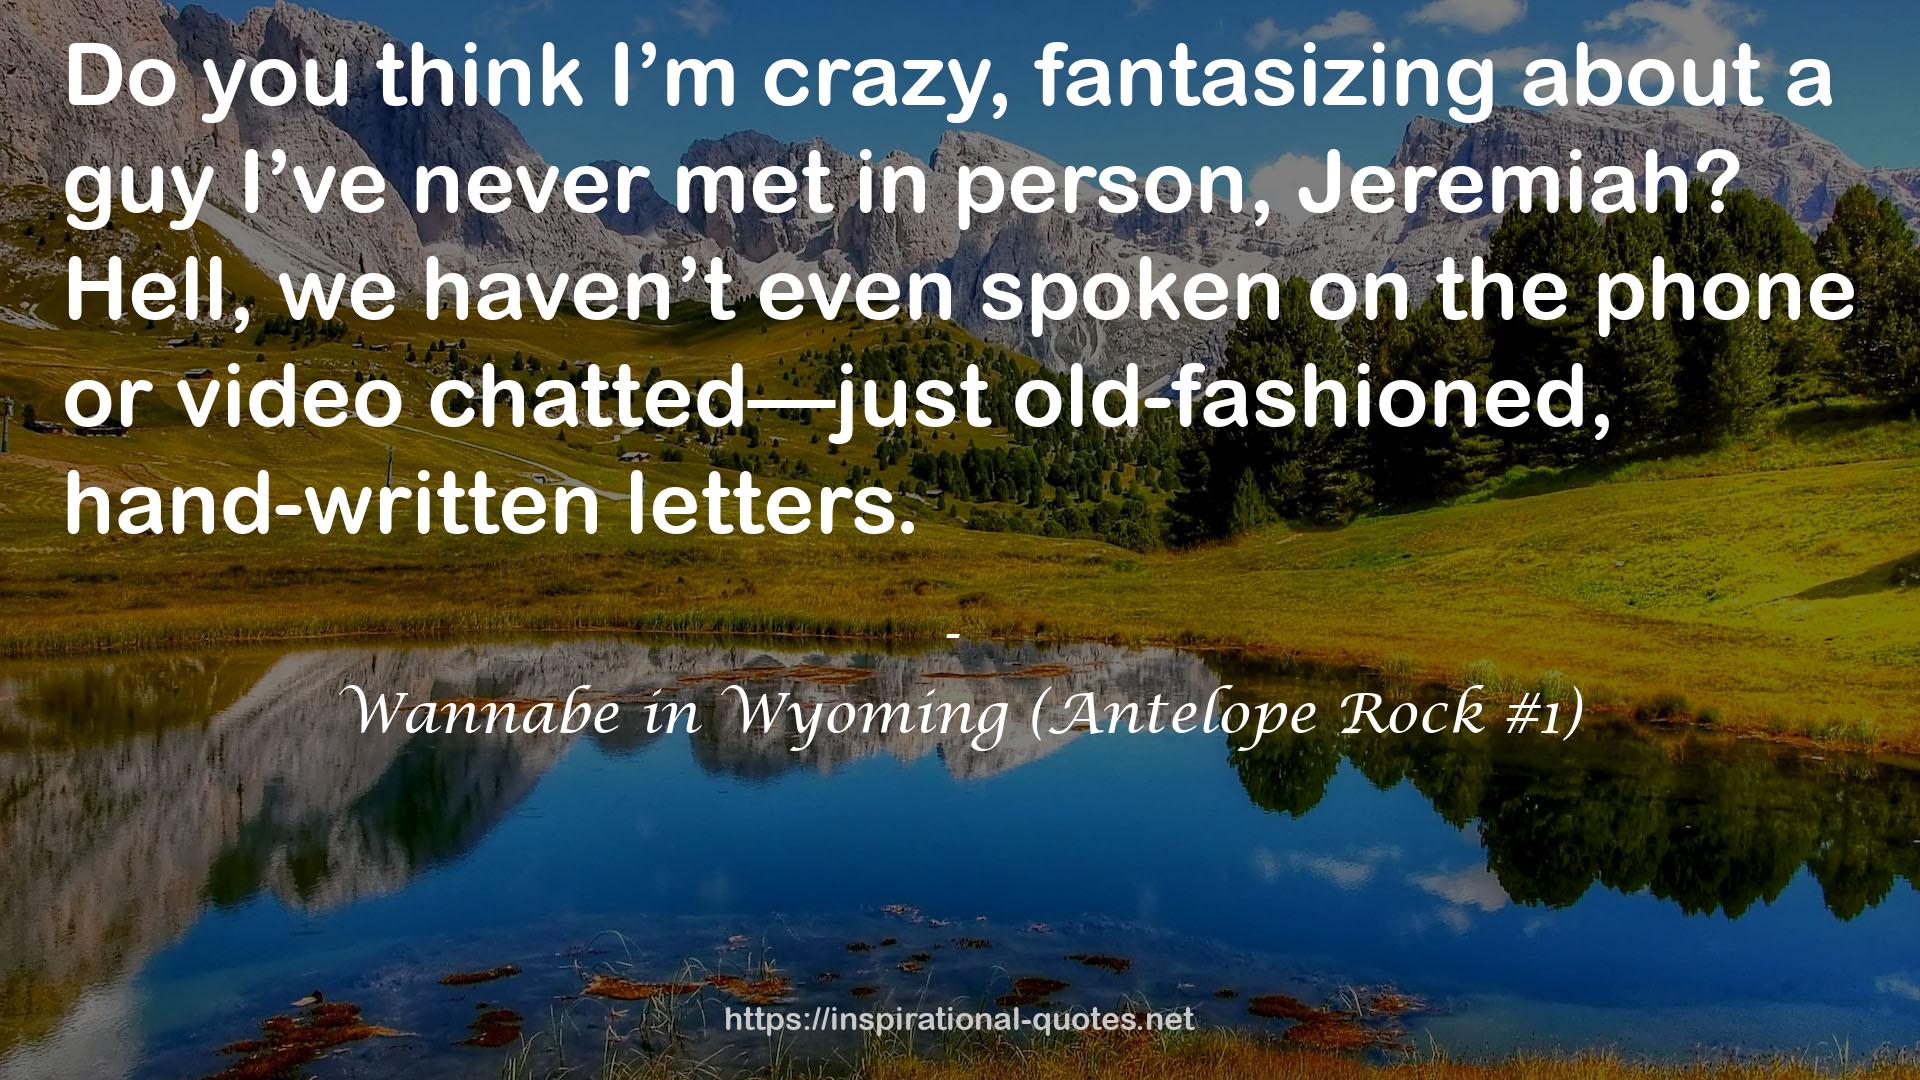 Wannabe in Wyoming (Antelope Rock #1) QUOTES